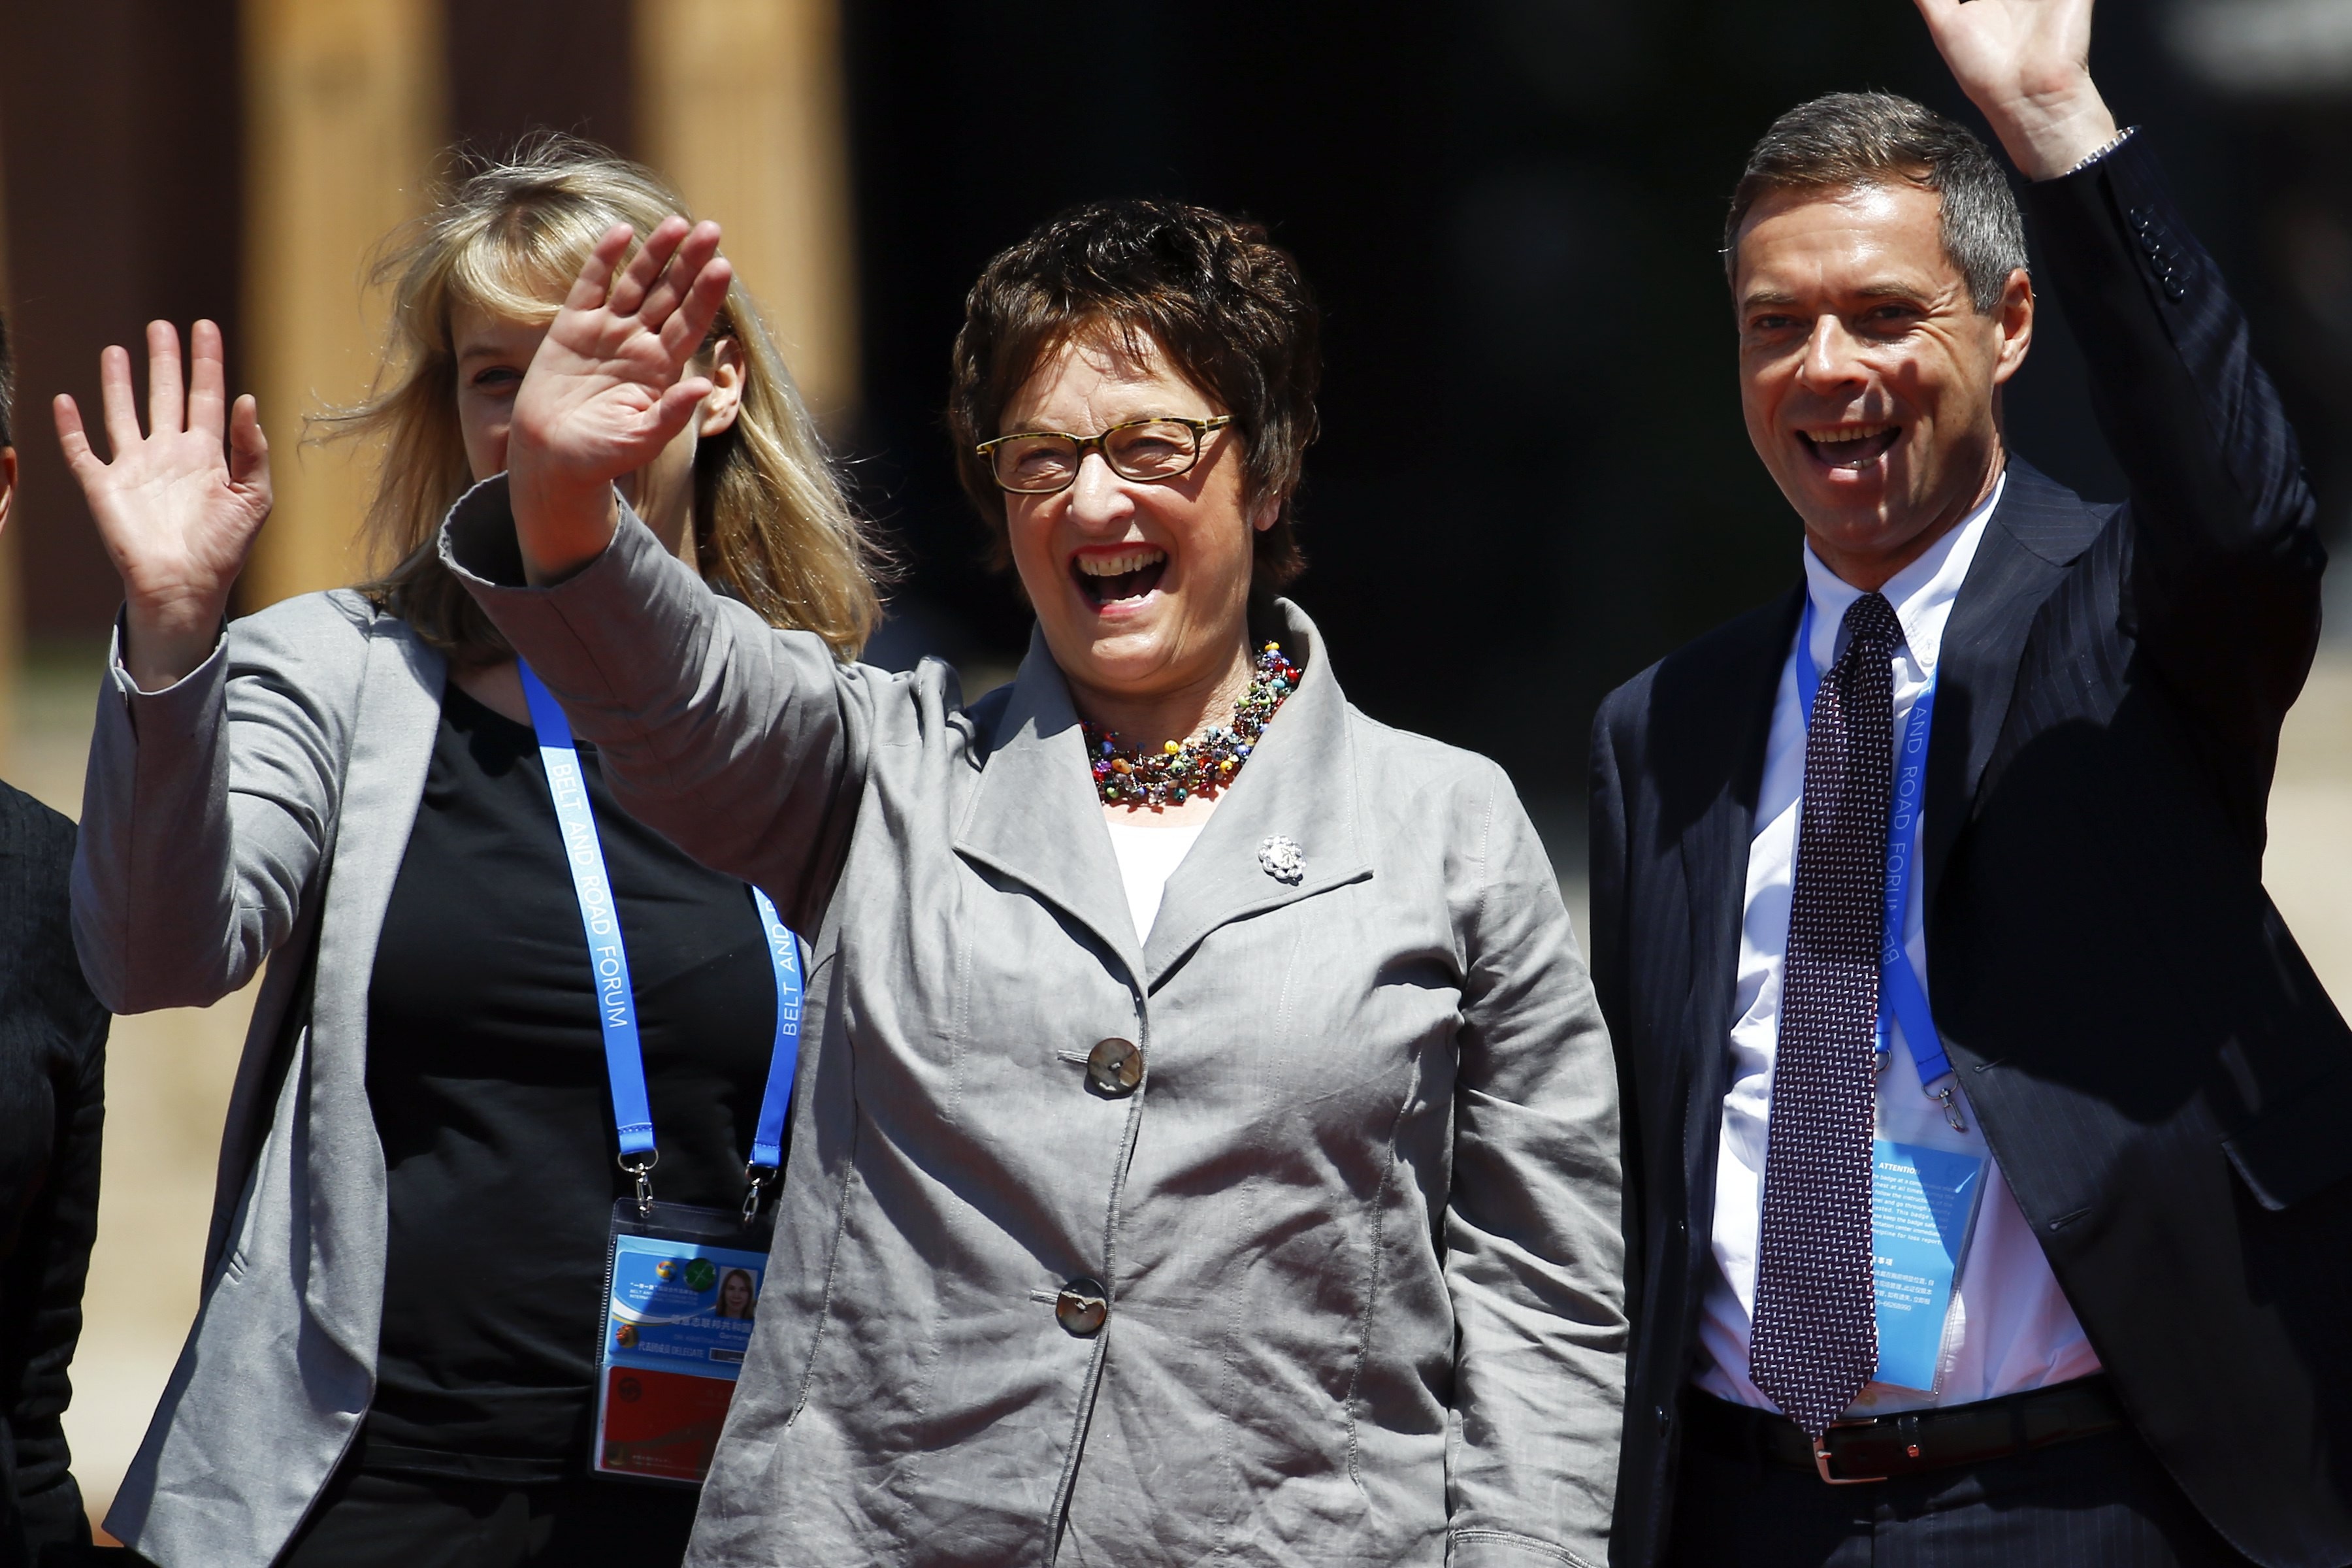 German Economy Minister Brigitte Zypries waves as she arrives for a group photo on the second and last day of the Belt and Road Forum in Beijing, on May 15. Photo: EPA